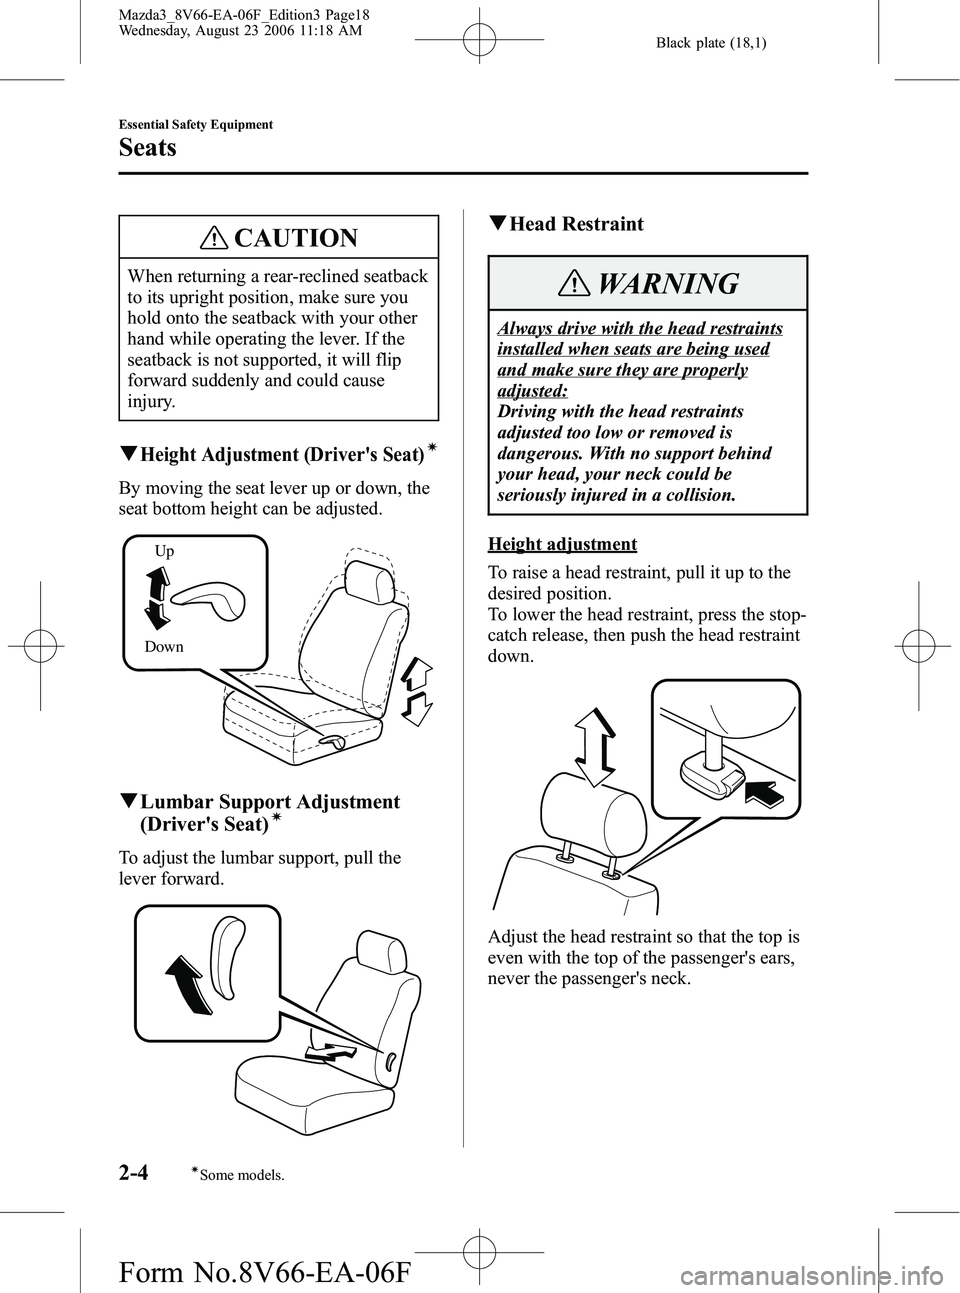 MAZDA MODEL 3 5-DOOR 2007 User Guide Black plate (18,1)
CAUTION
When returning a rear-reclined seatback
to its upright position, make sure you
hold onto the seatback with your other
hand while operating the lever. If the
seatback is not 